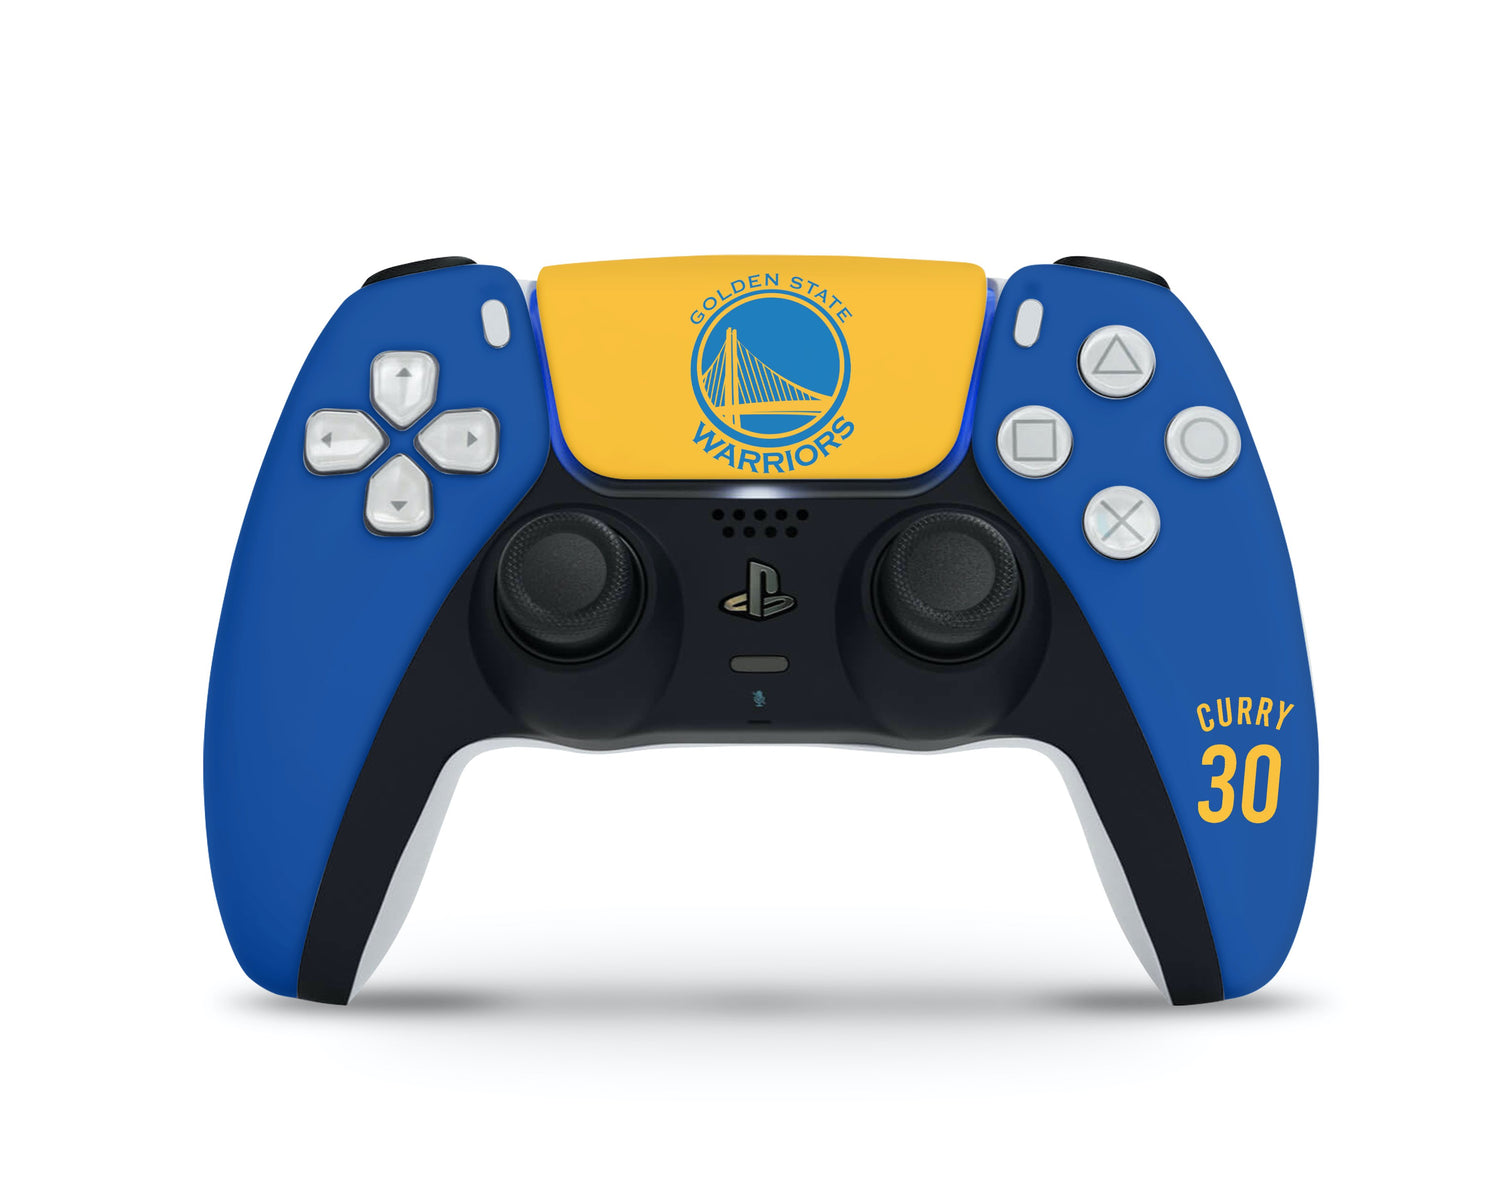 Lux Skins PS5 Controller Golden State Warriors Steph CurrySkins - Sports Basketball Skin